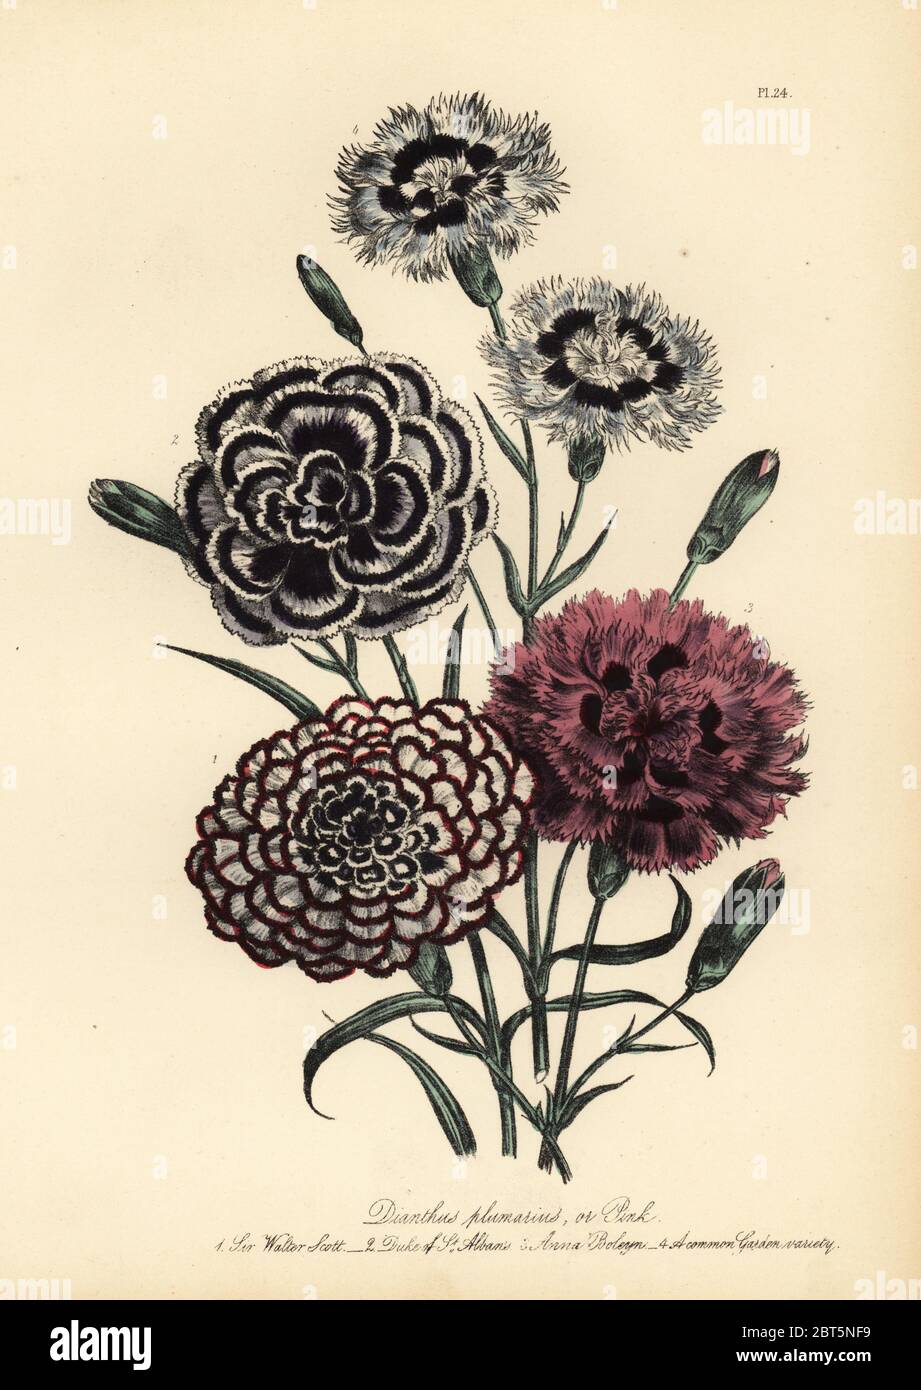 Sir Walter Scott, Duke of St. Albans, Anne Boleyn, and common garden variety carnation, Dianthus plumarius. Handfinished chromolithograph by Henry Noel Humphreys after an illustration by Jane Loudon from Mrs. Jane Loudon's Ladies Flower Garden of Ornamental Perennials, William S. Orr, London, 1849. Stock Photo